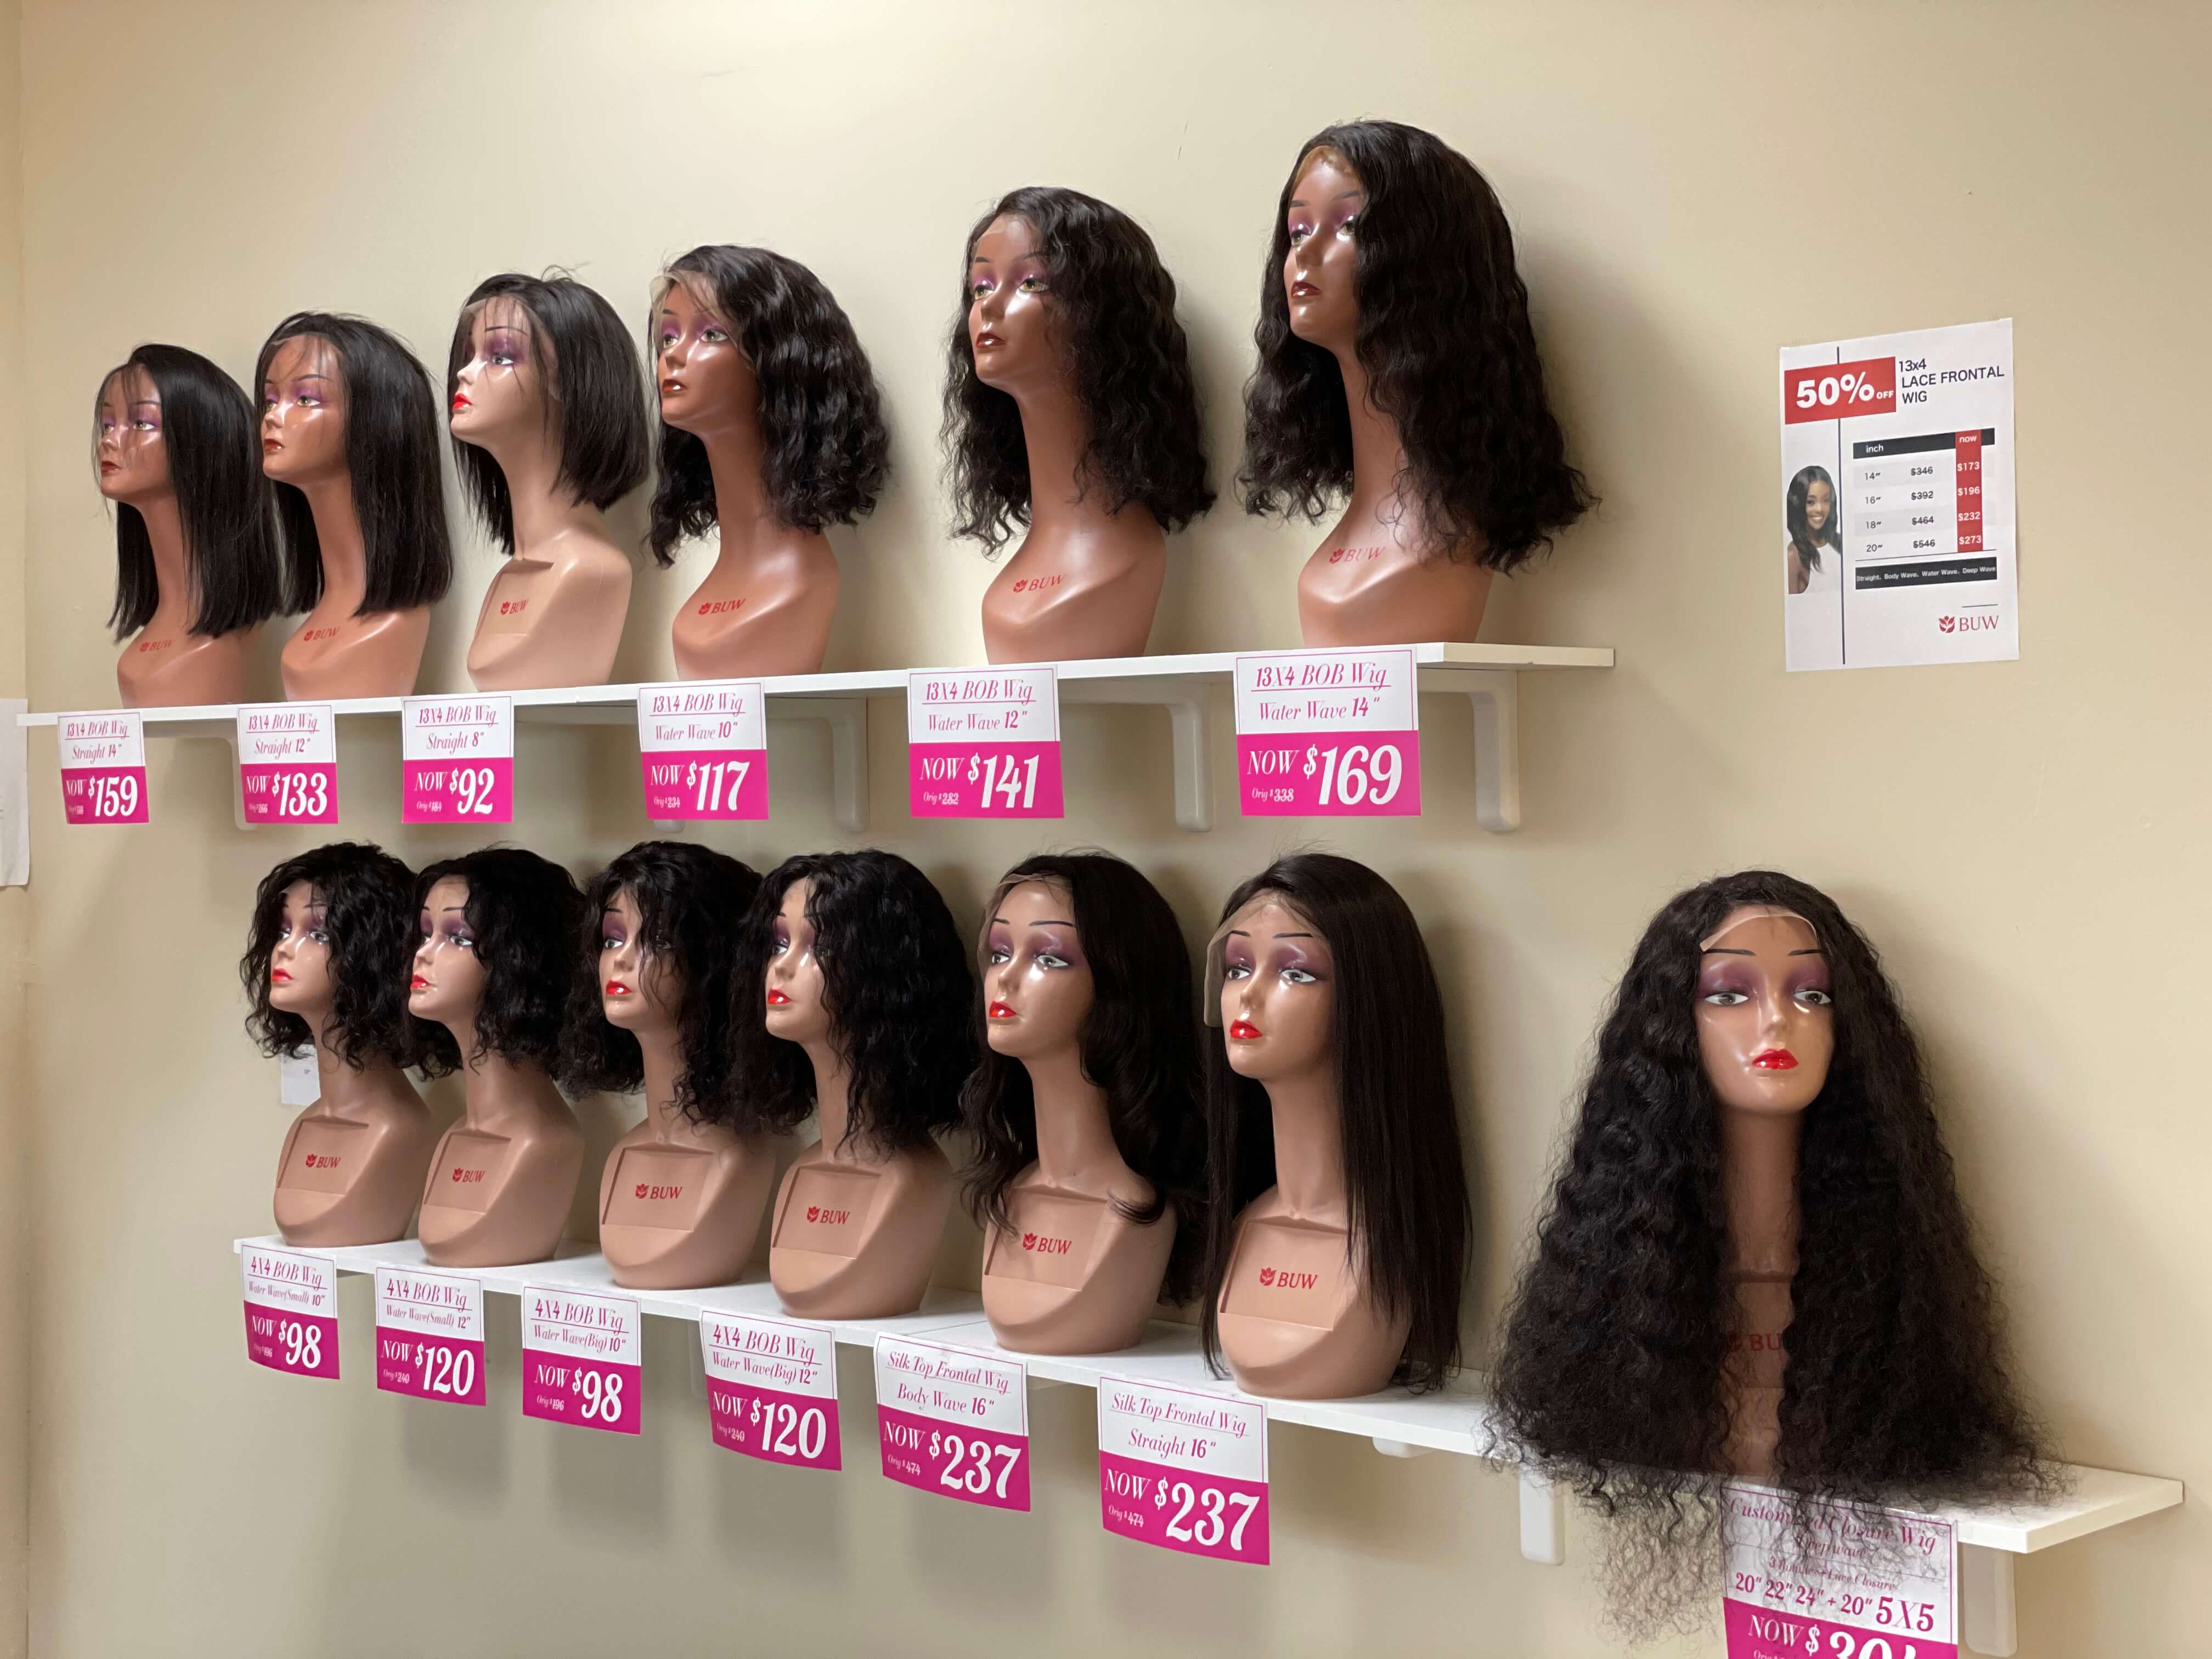 Wig Store Near Me - Find the Best Local Wig Shops – Xrs Beauty Hair